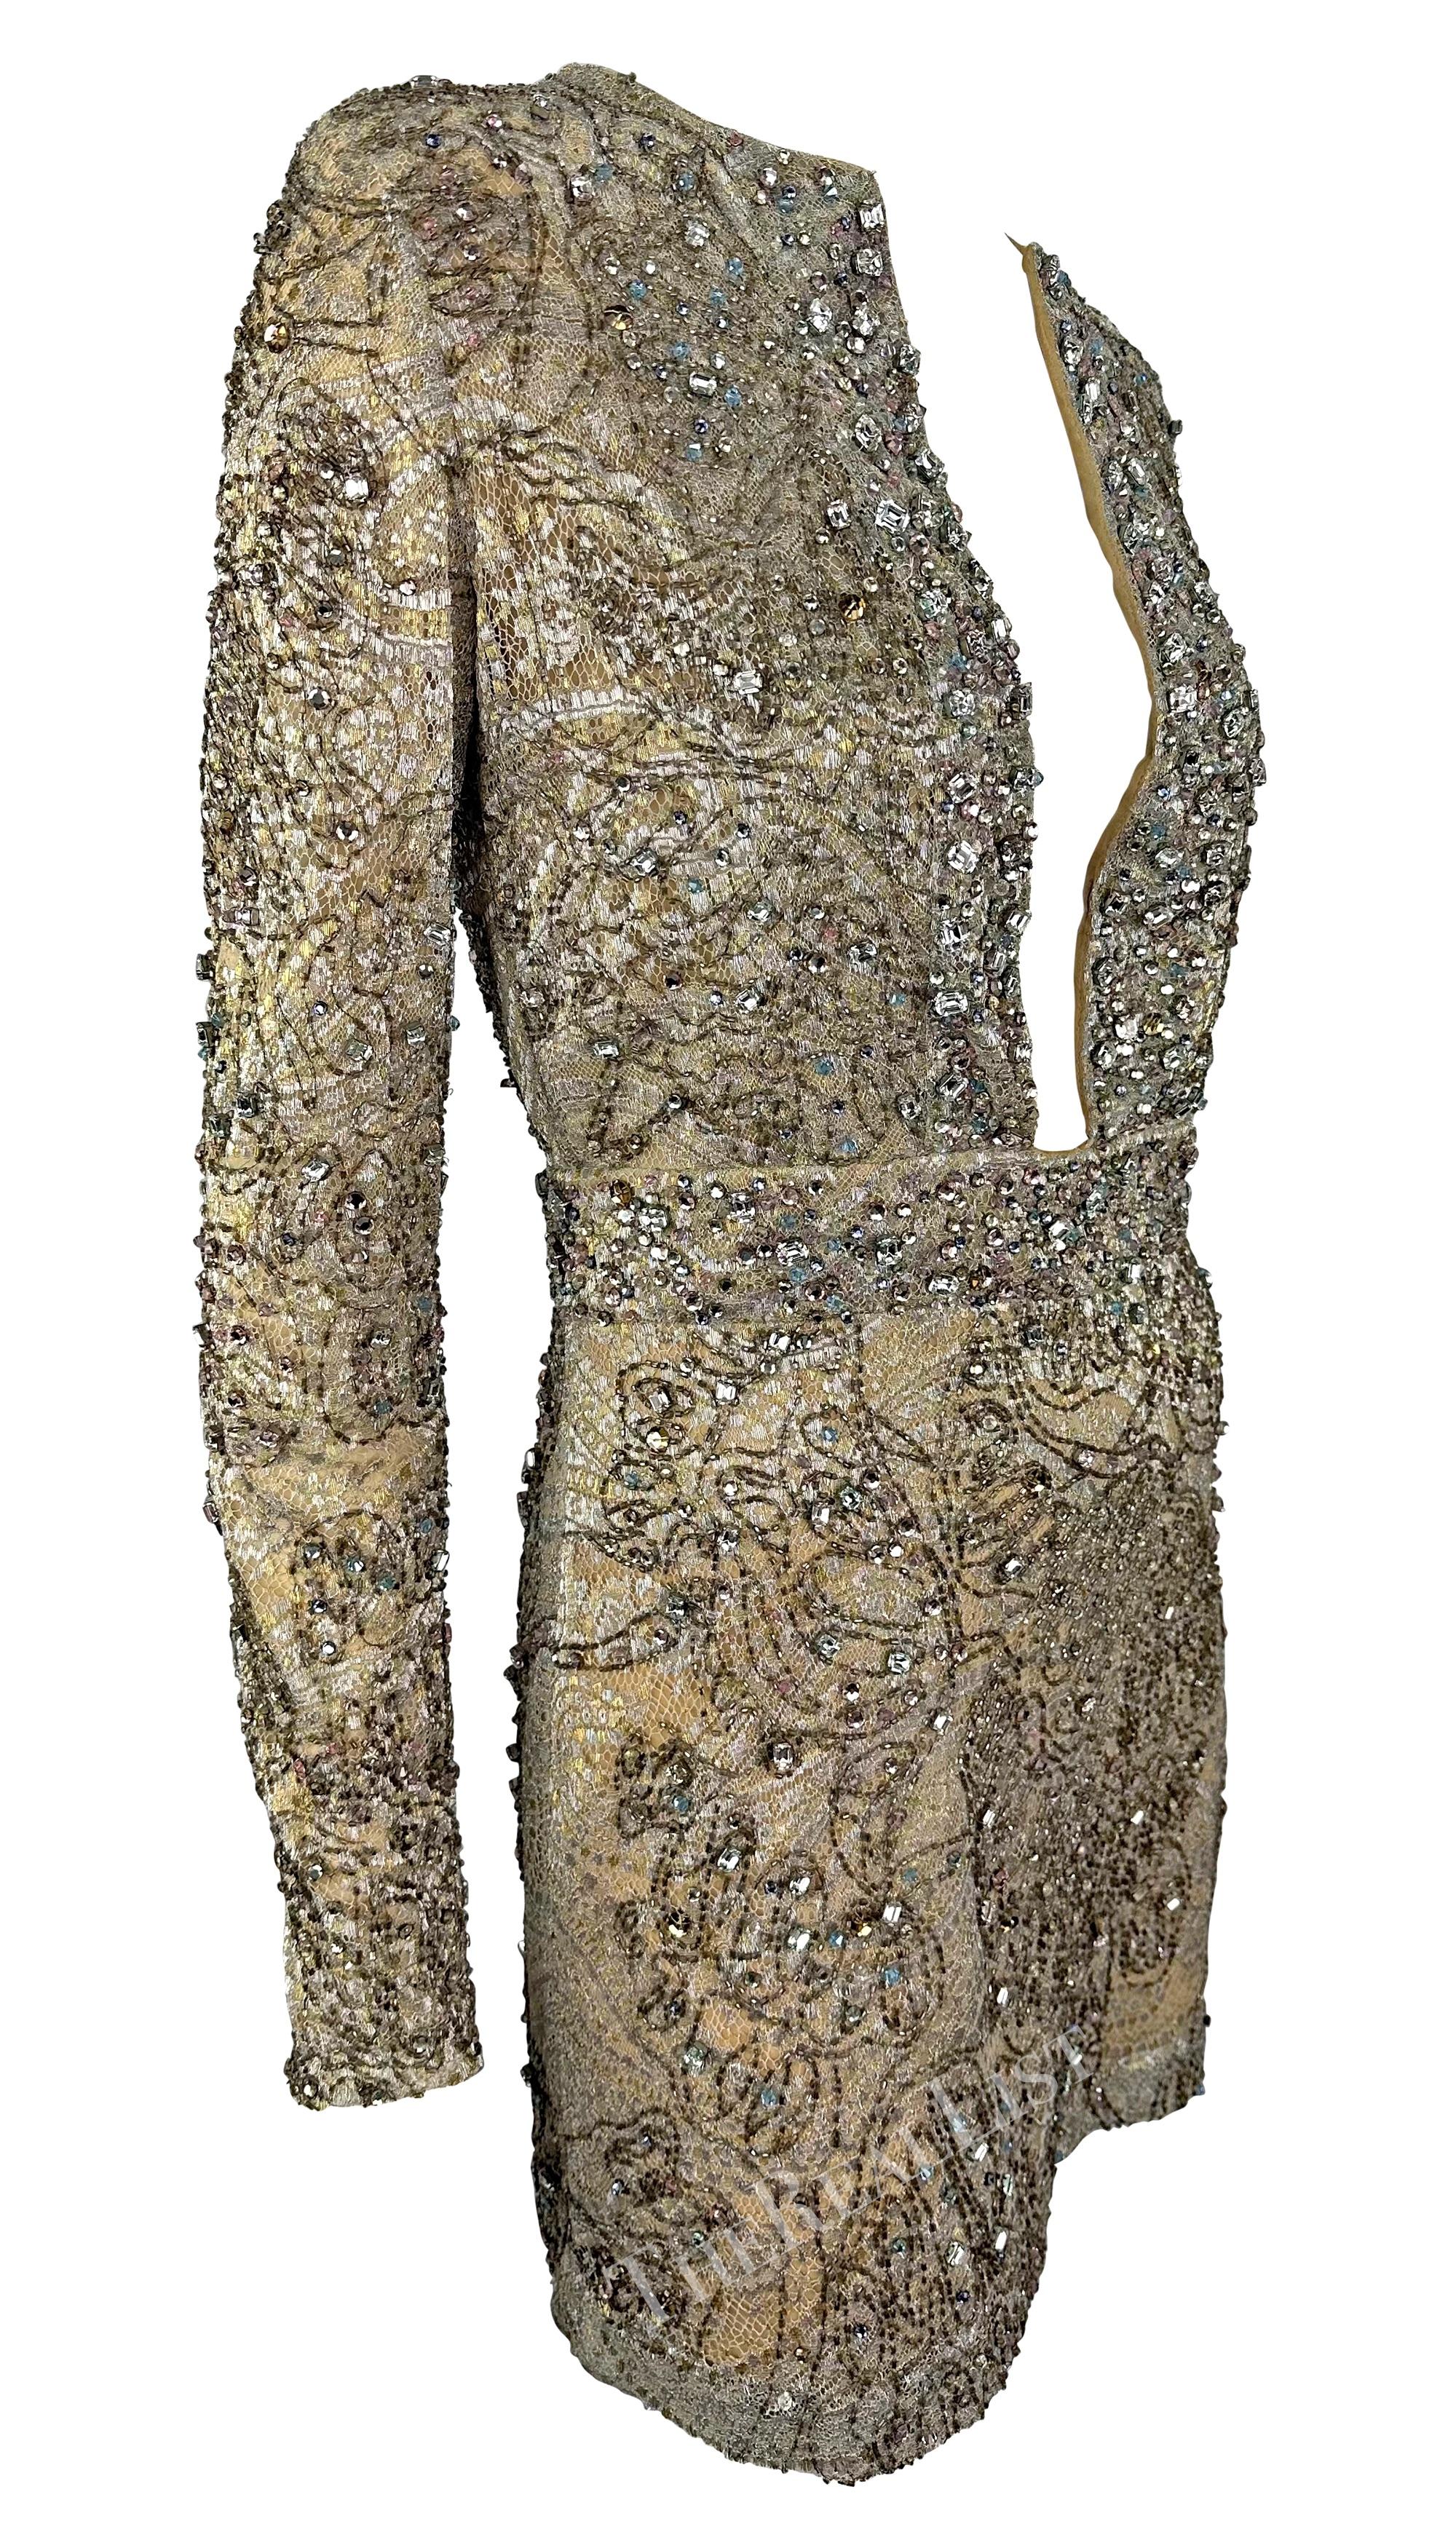 F/W 2000 Gucci by Tom Ford Rhinestone Beaded Plunge Silver Beige Lace Mini Dress For Sale 7